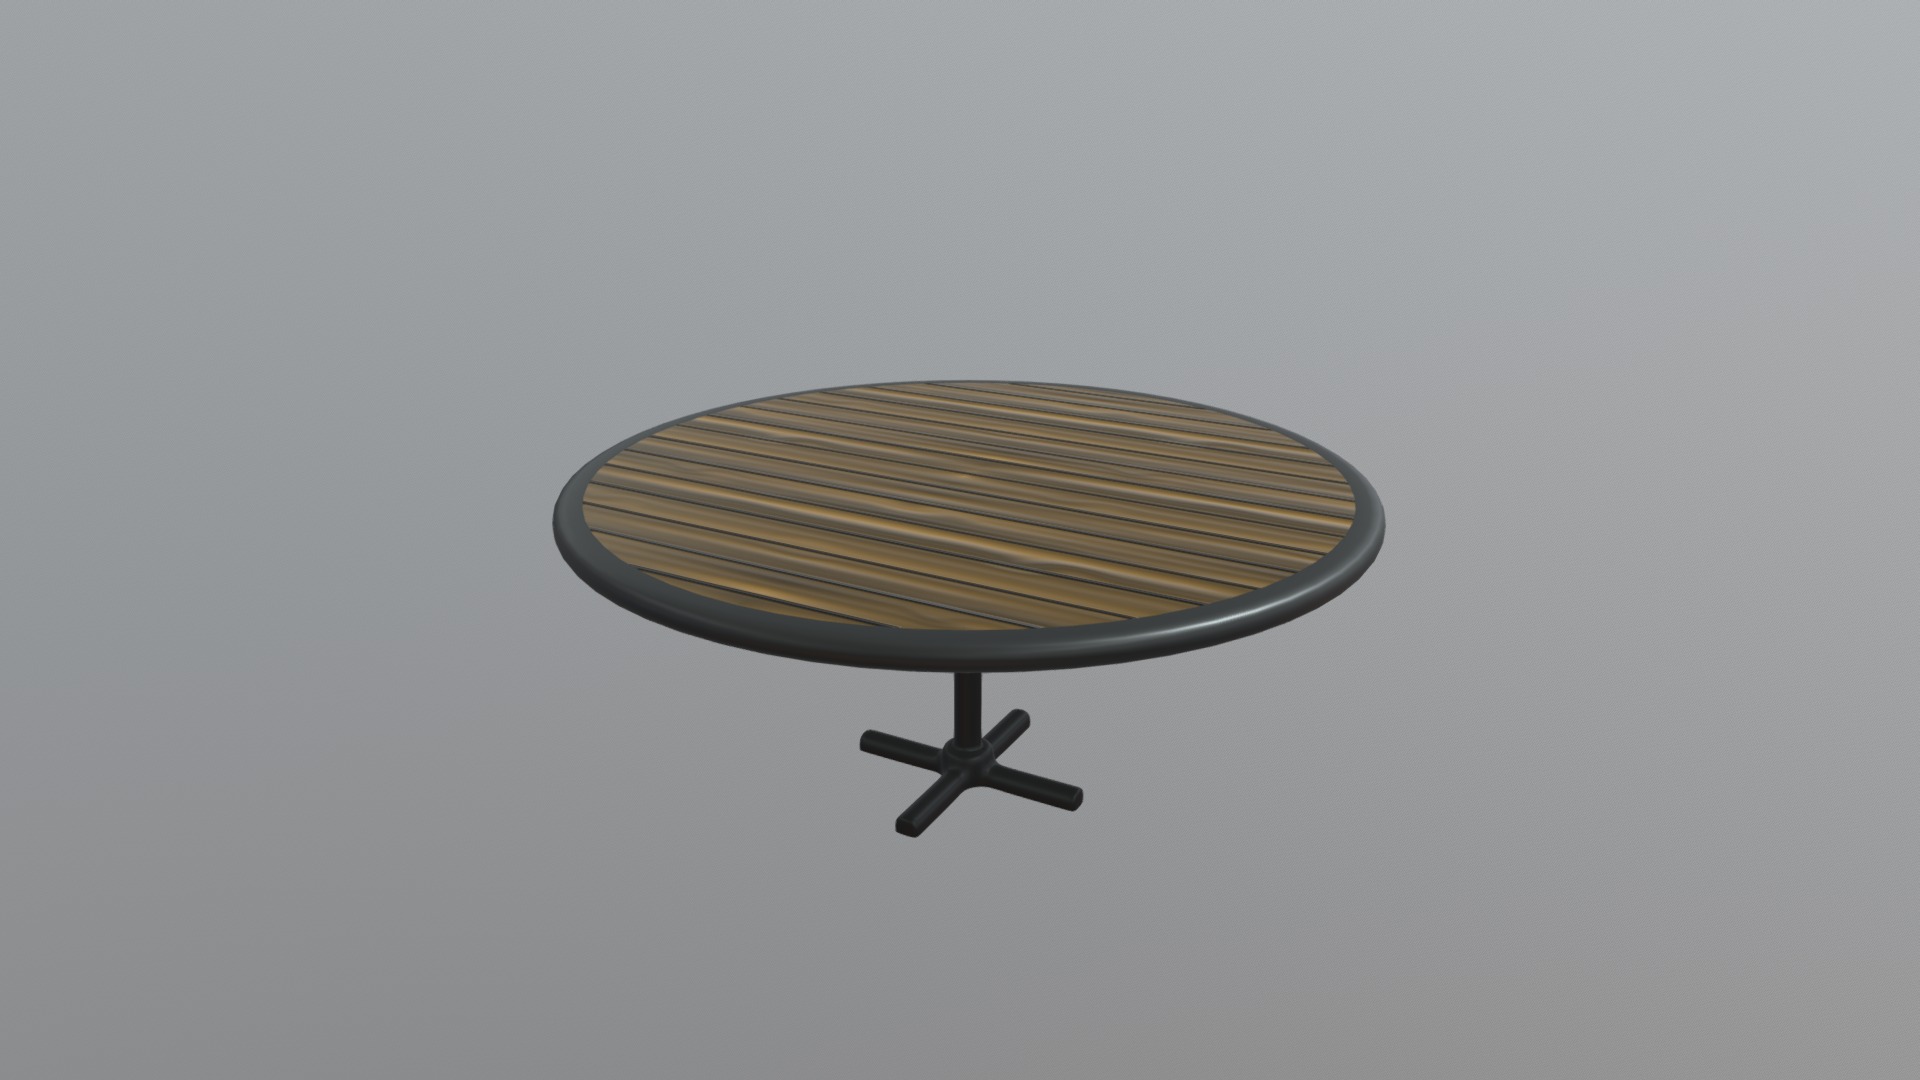 3D model Restaurant Circular Table - This is a 3D model of the Restaurant Circular Table. The 3D model is about a wooden table with a lamp shade.